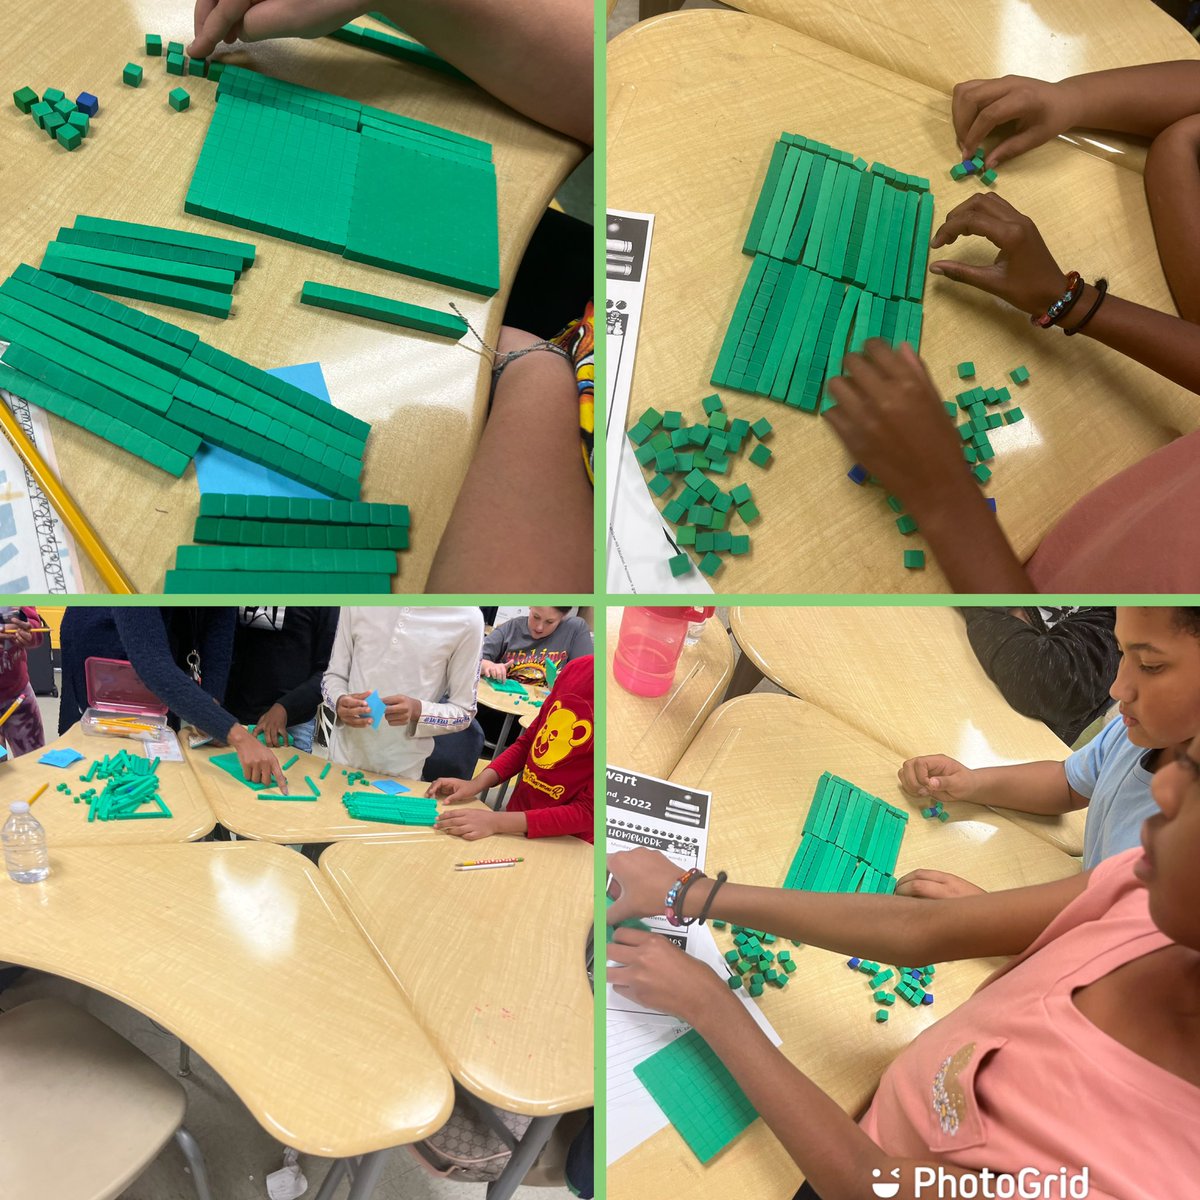 Such a great day exploring 2-digit by 2-digit multiplication using base 10 blocks to create area models. Ss at @luther_elem loved determining how many seedlings Wangari planted. 🌱@LizJrealtor @HSVk12 @AmstiUAH @SueOConnellMath